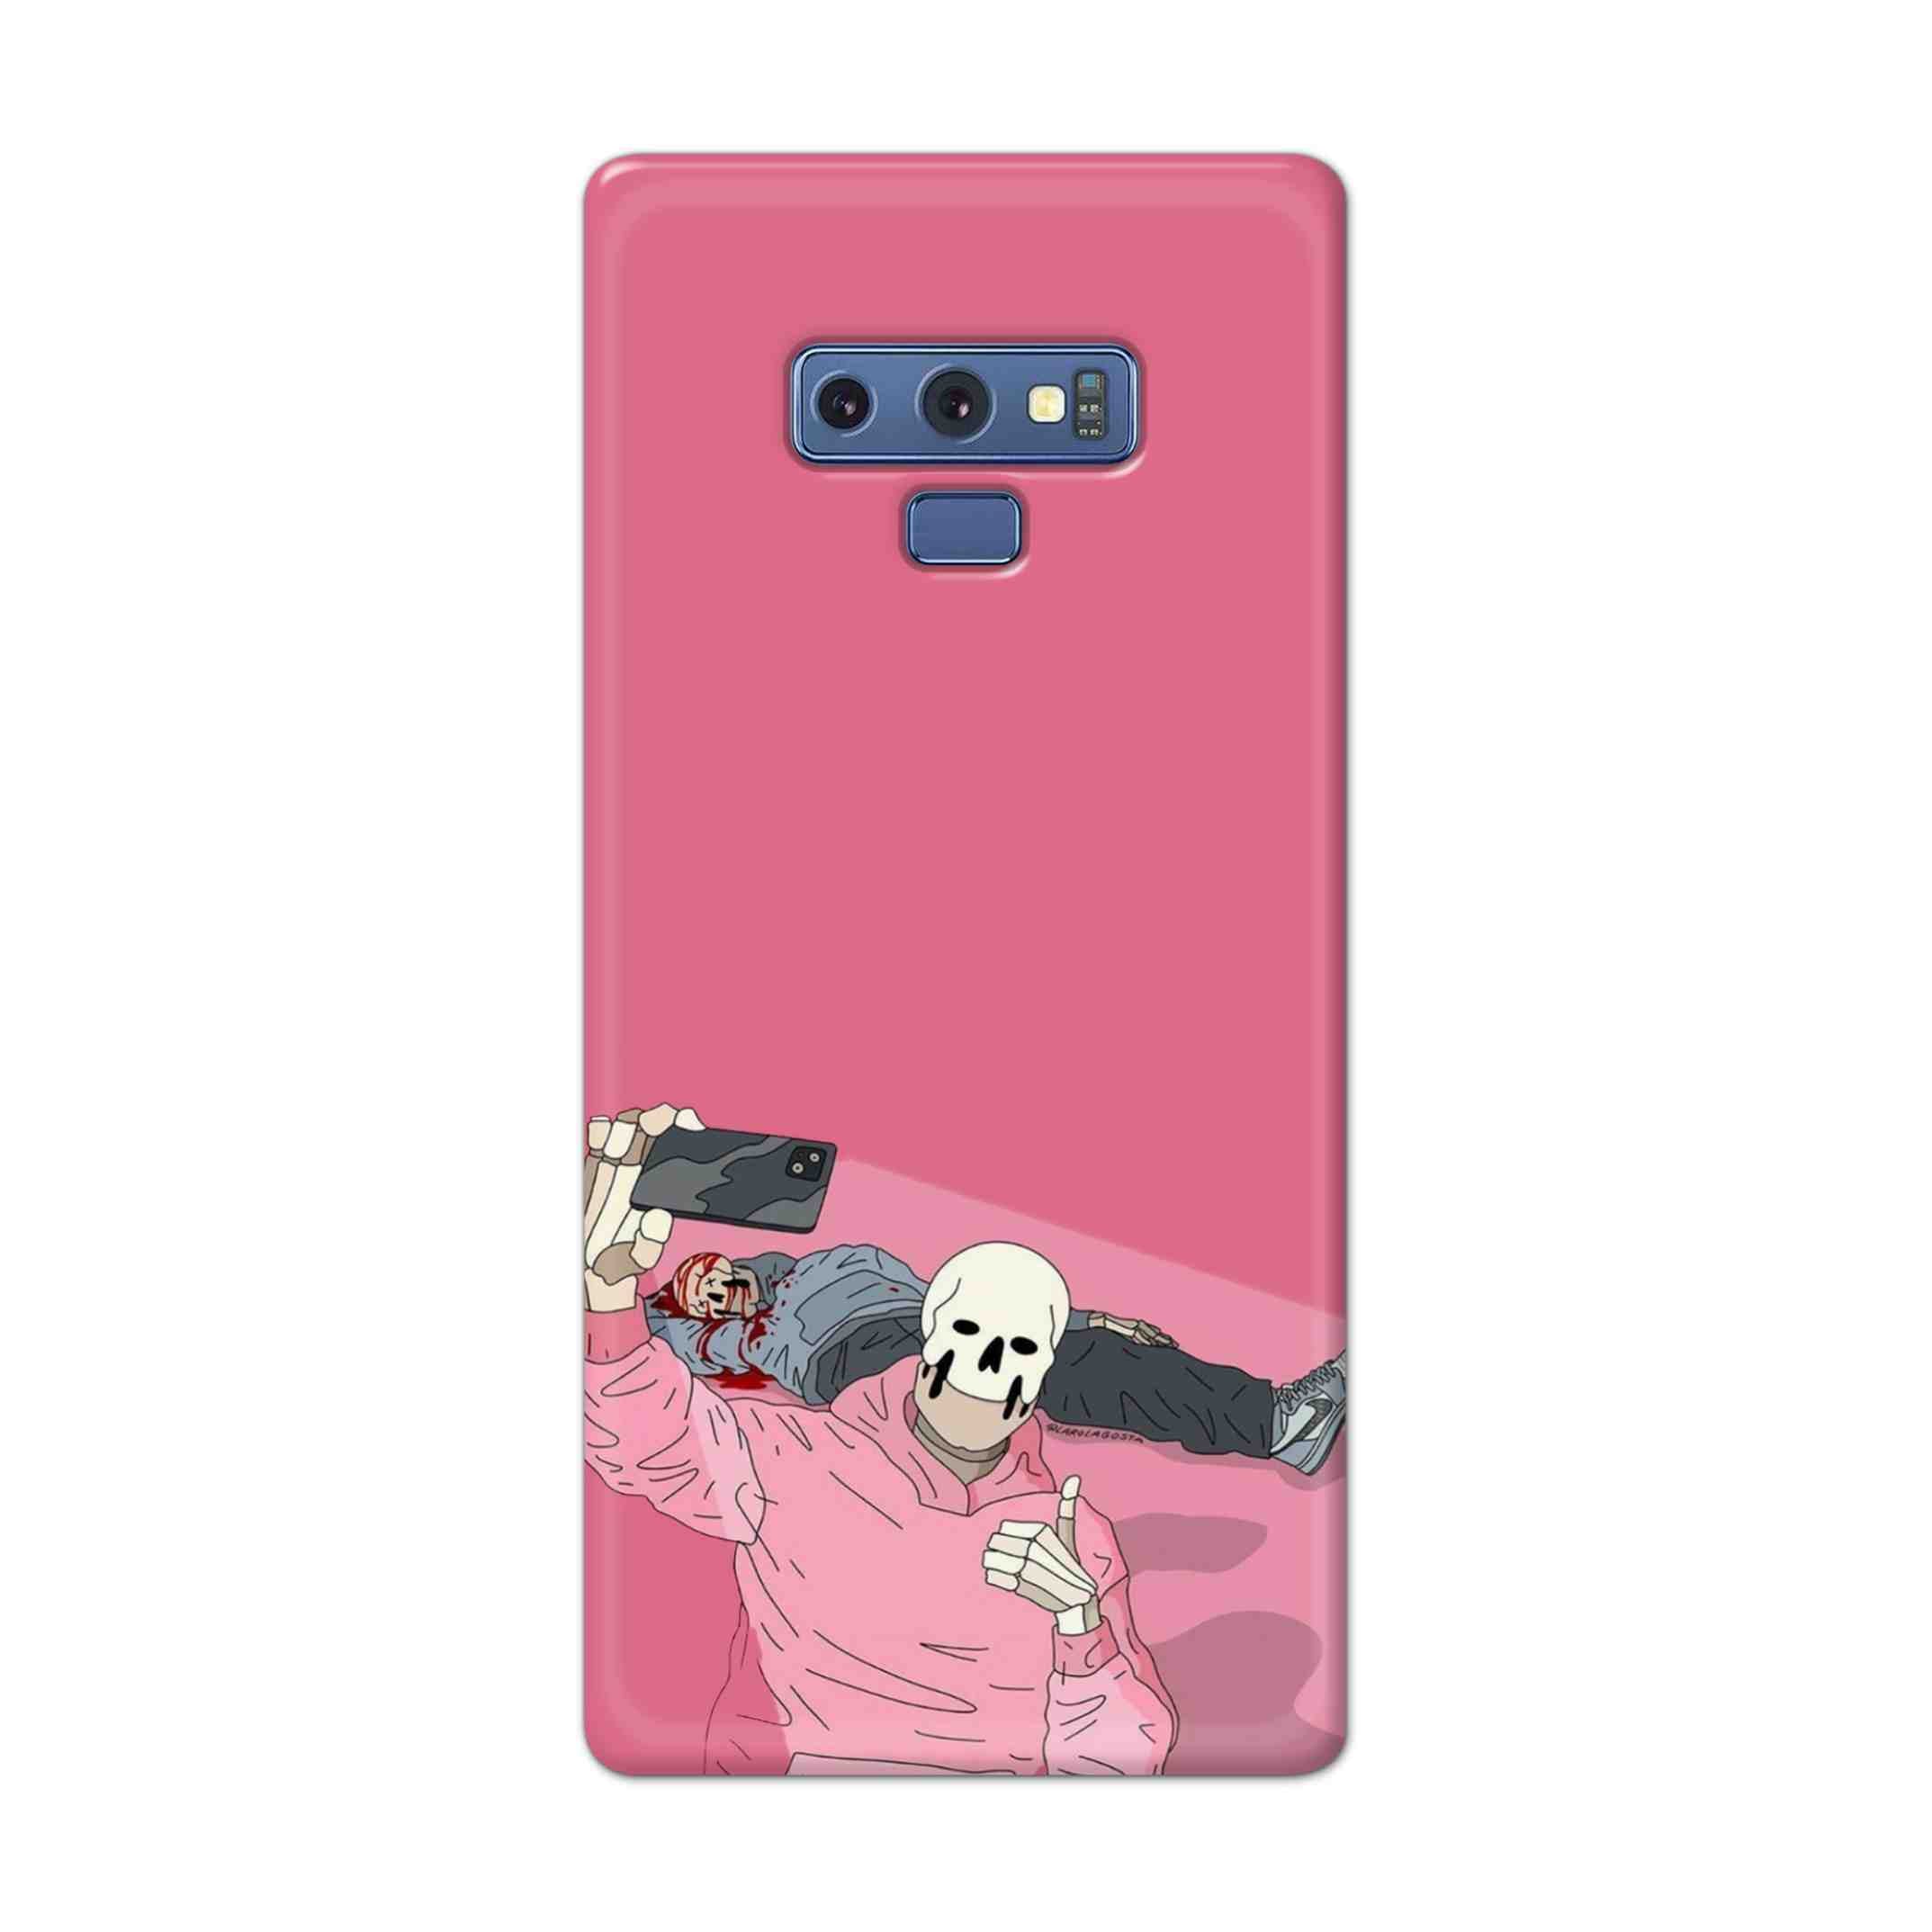 Buy Selfie Hard Back Mobile Phone Case Cover For Samsung Galaxy Note 9 Online